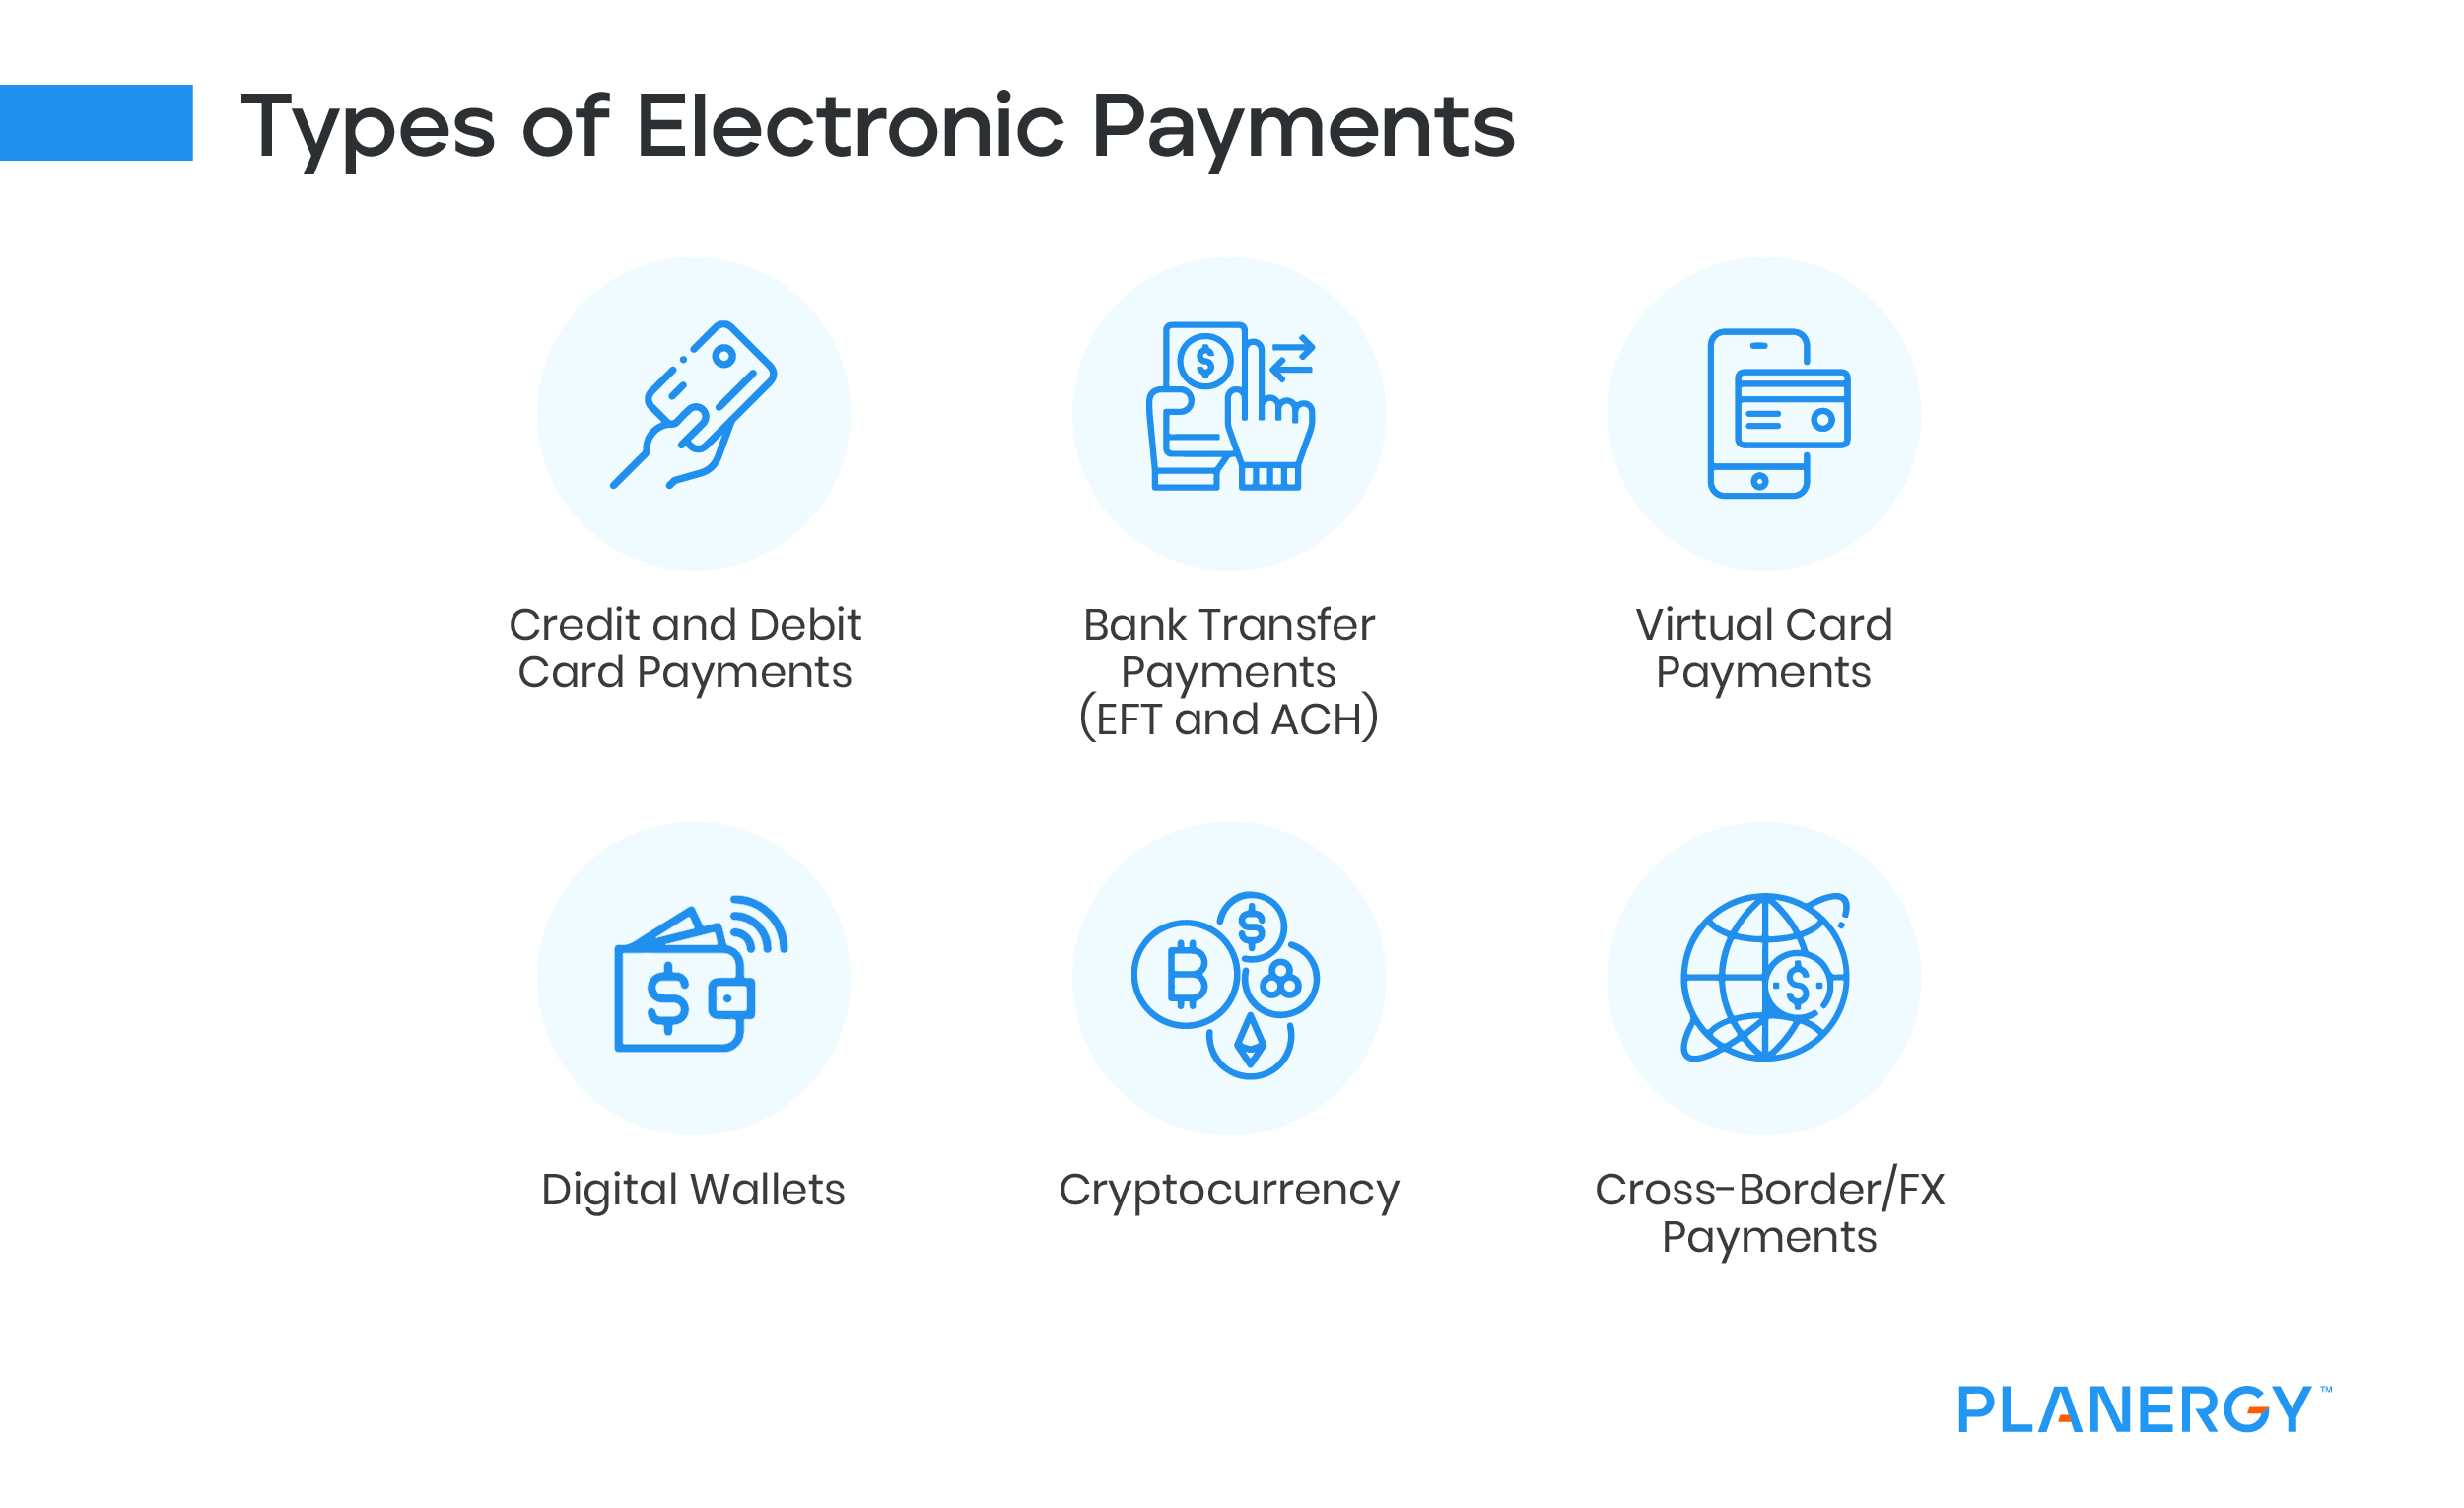 Types of Electronic Payments